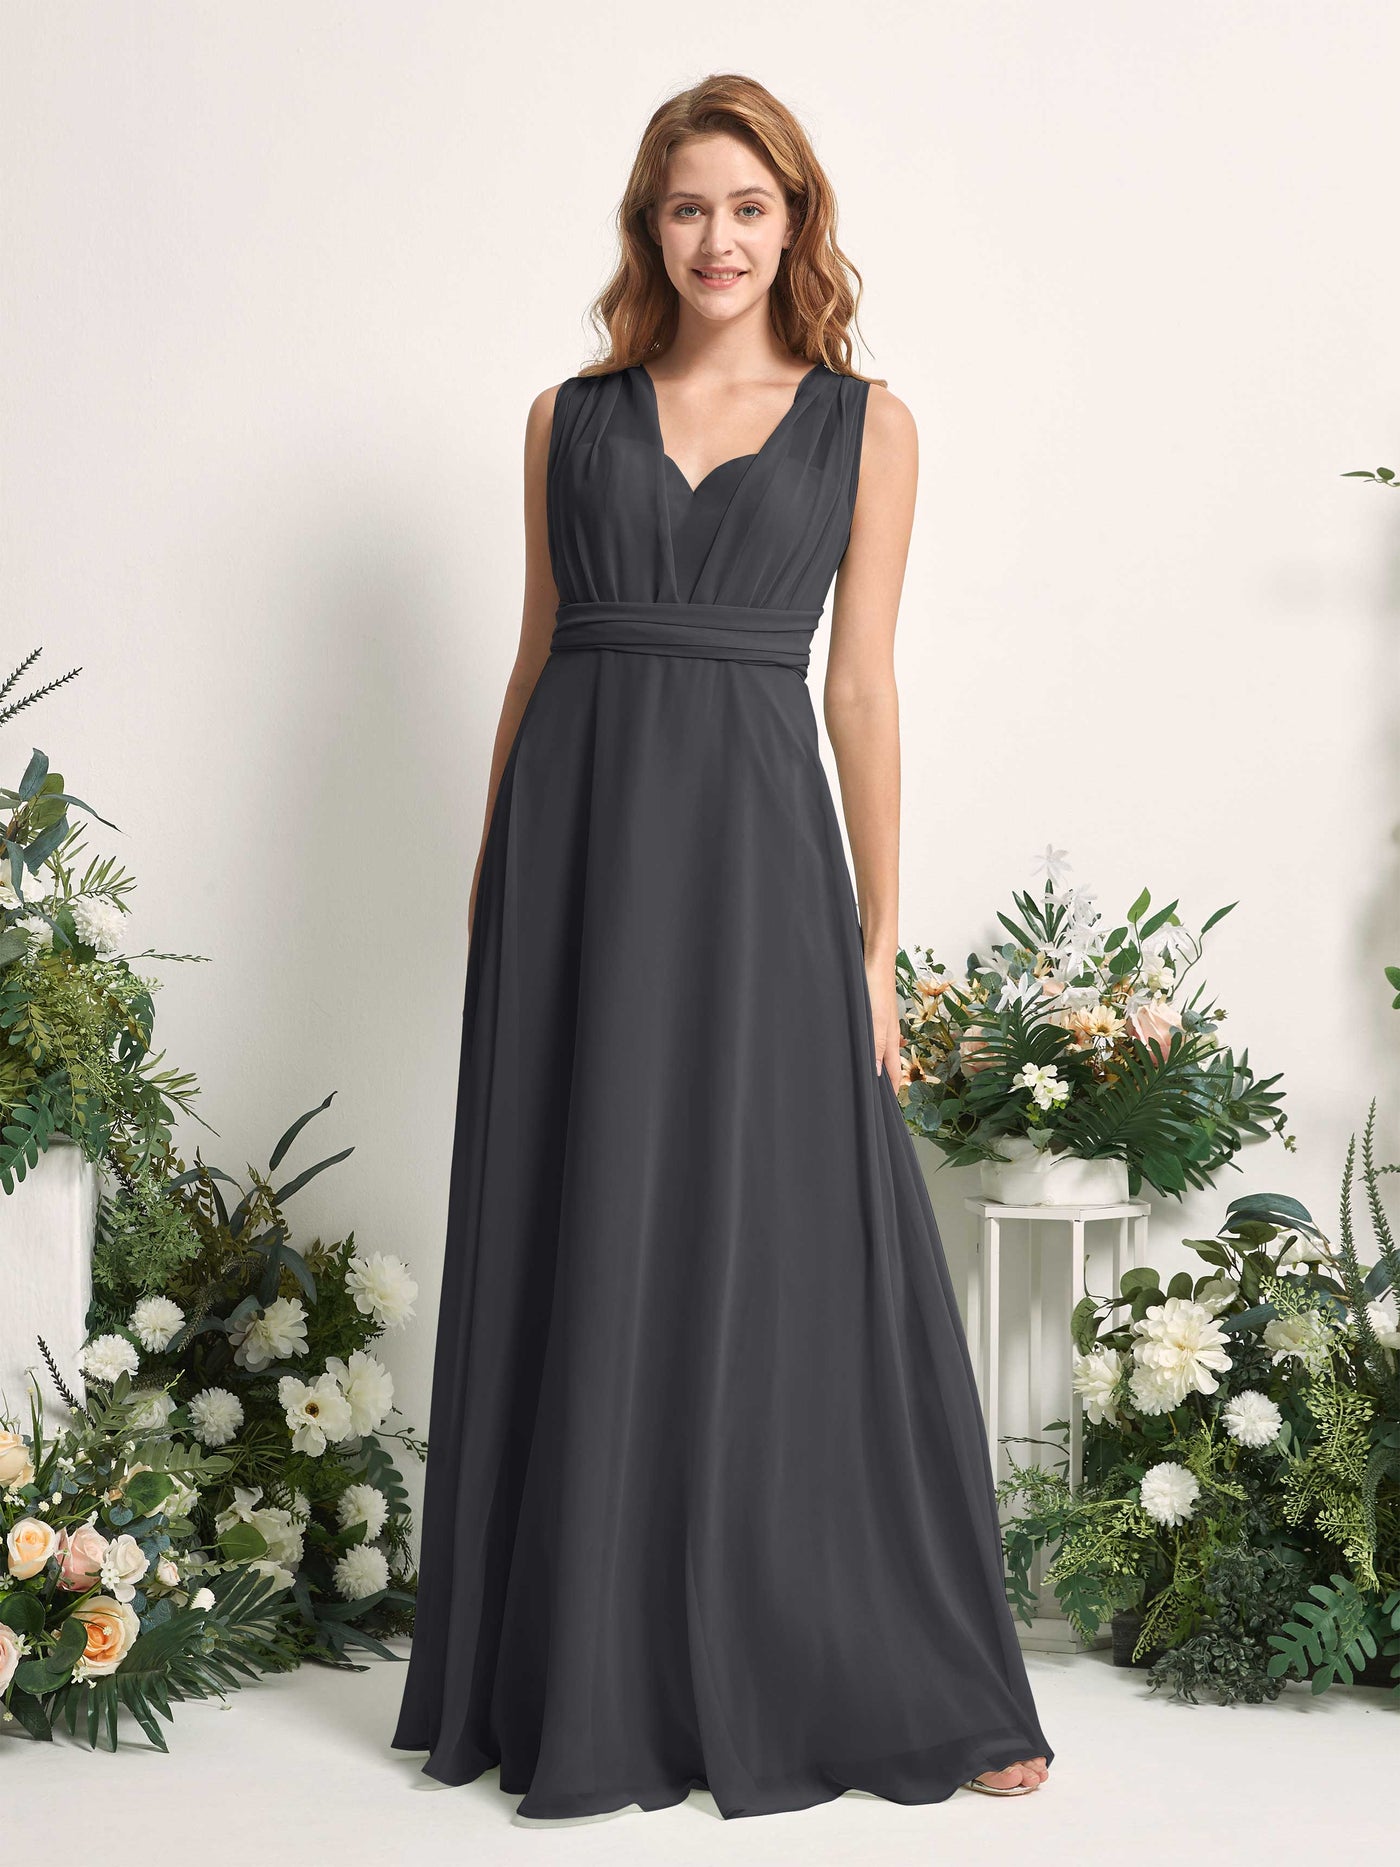 Bridesmaid Dress A-line Chiffon Halter Full Length Short Sleeves Wedding Party Dress - Pewter (81226338)#color_pewter